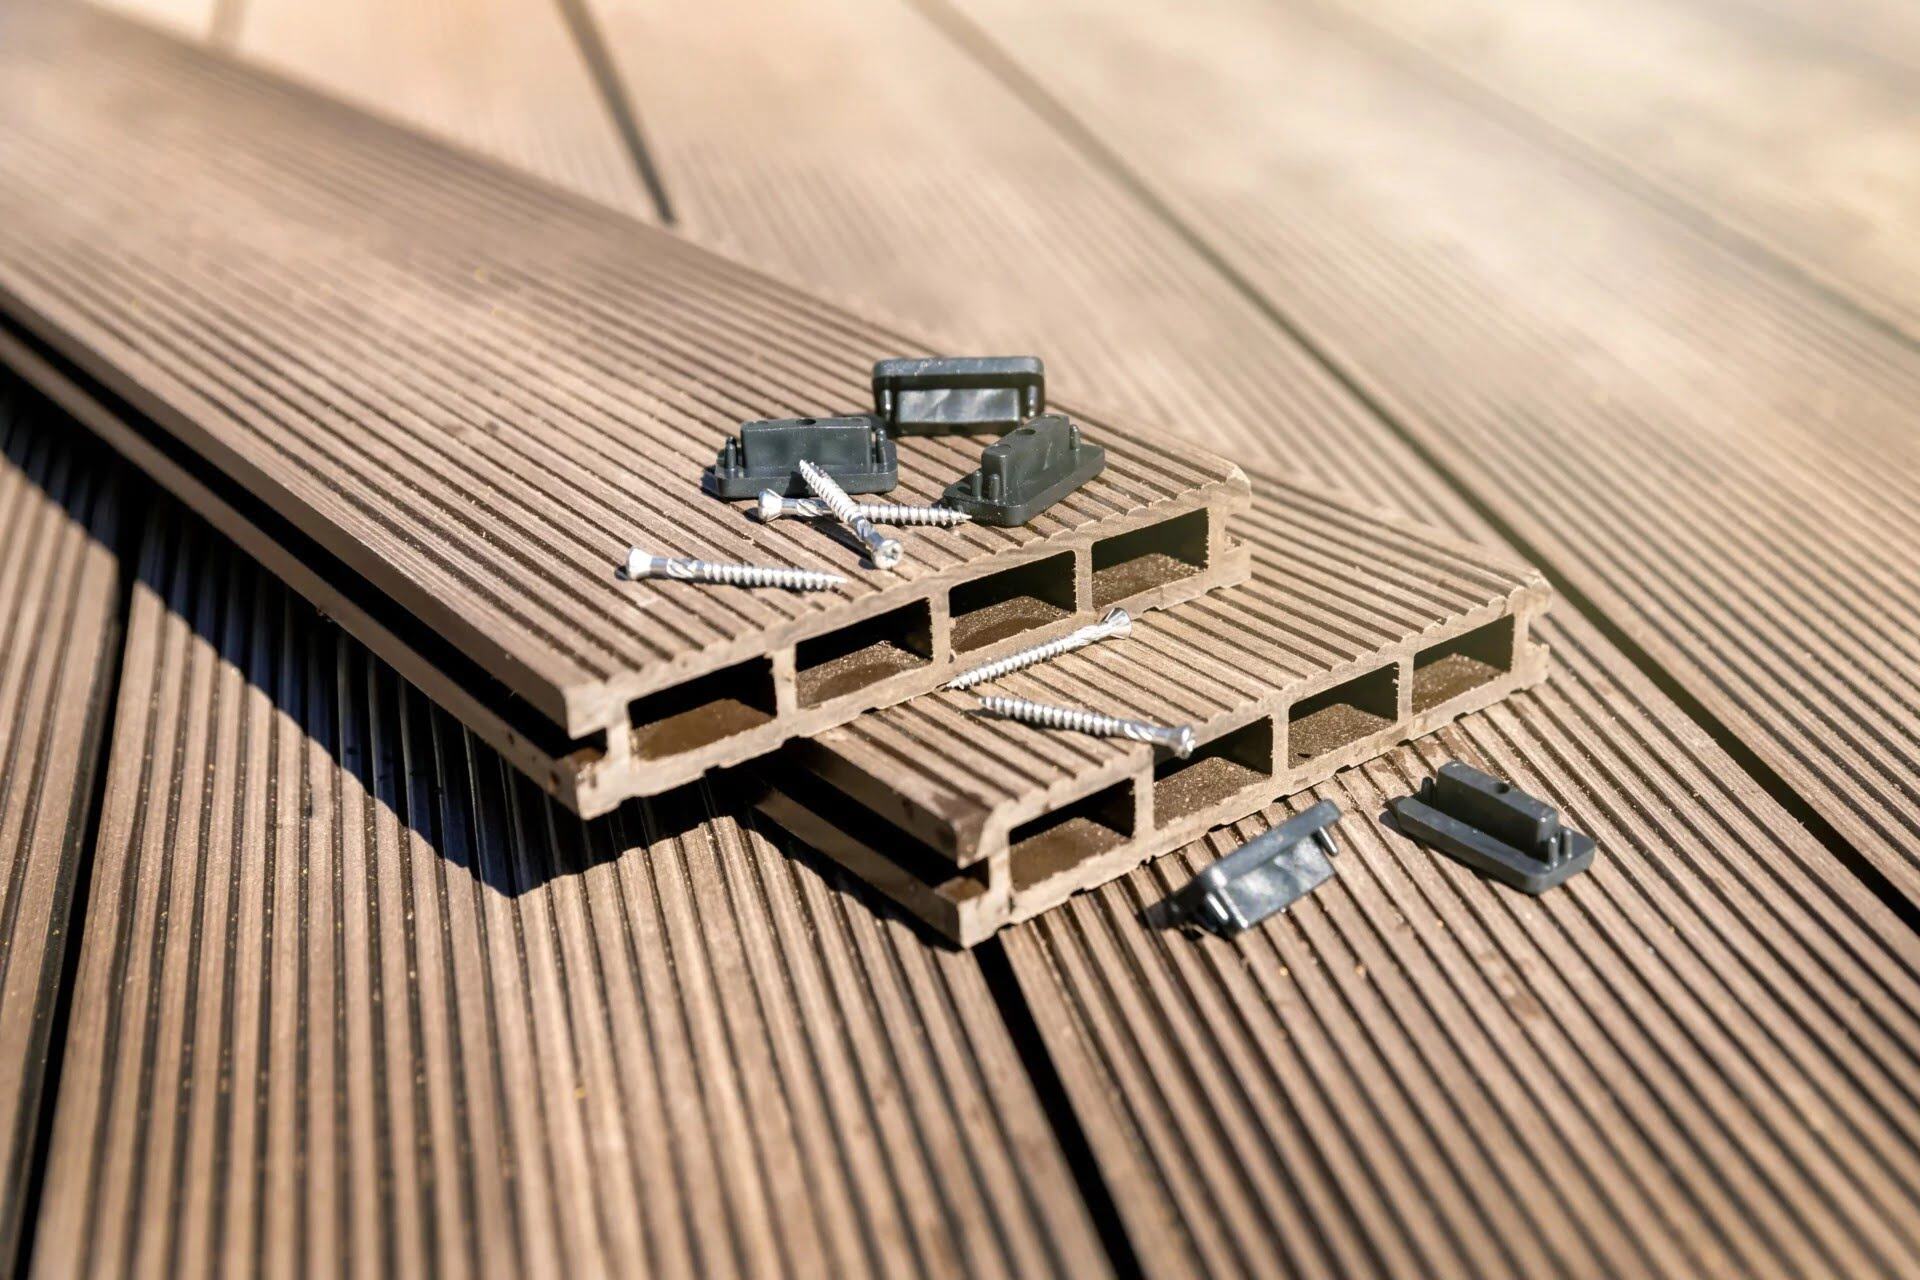 Where Can I Buy Composite Decking